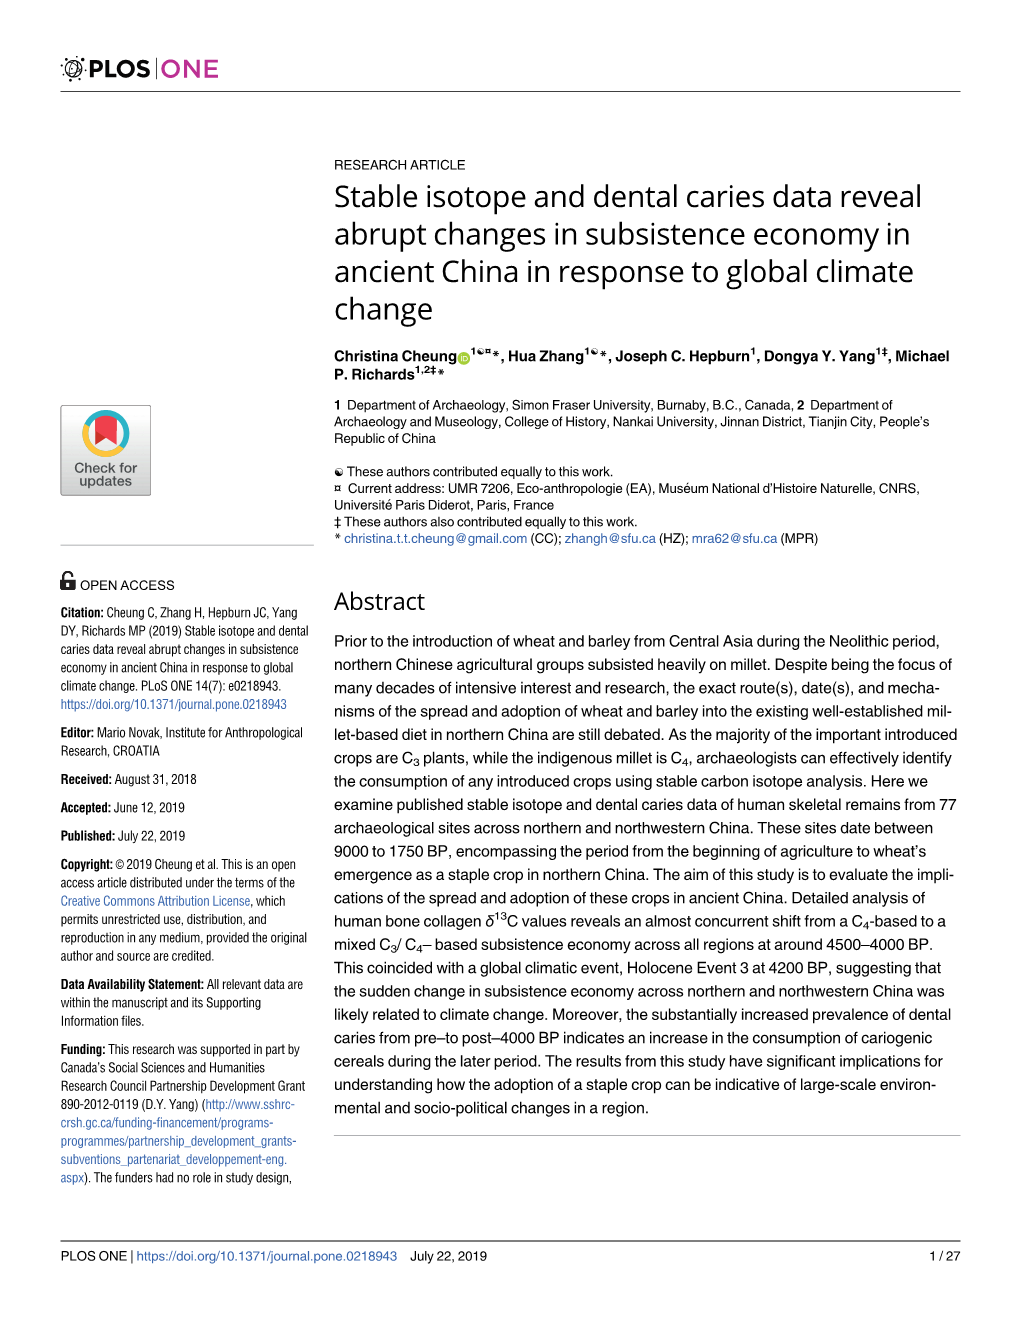 Stable Isotope and Dental Caries Data Reveal Abrupt Changes in Subsistence Economy in Ancient China in Response to Global Climate Change